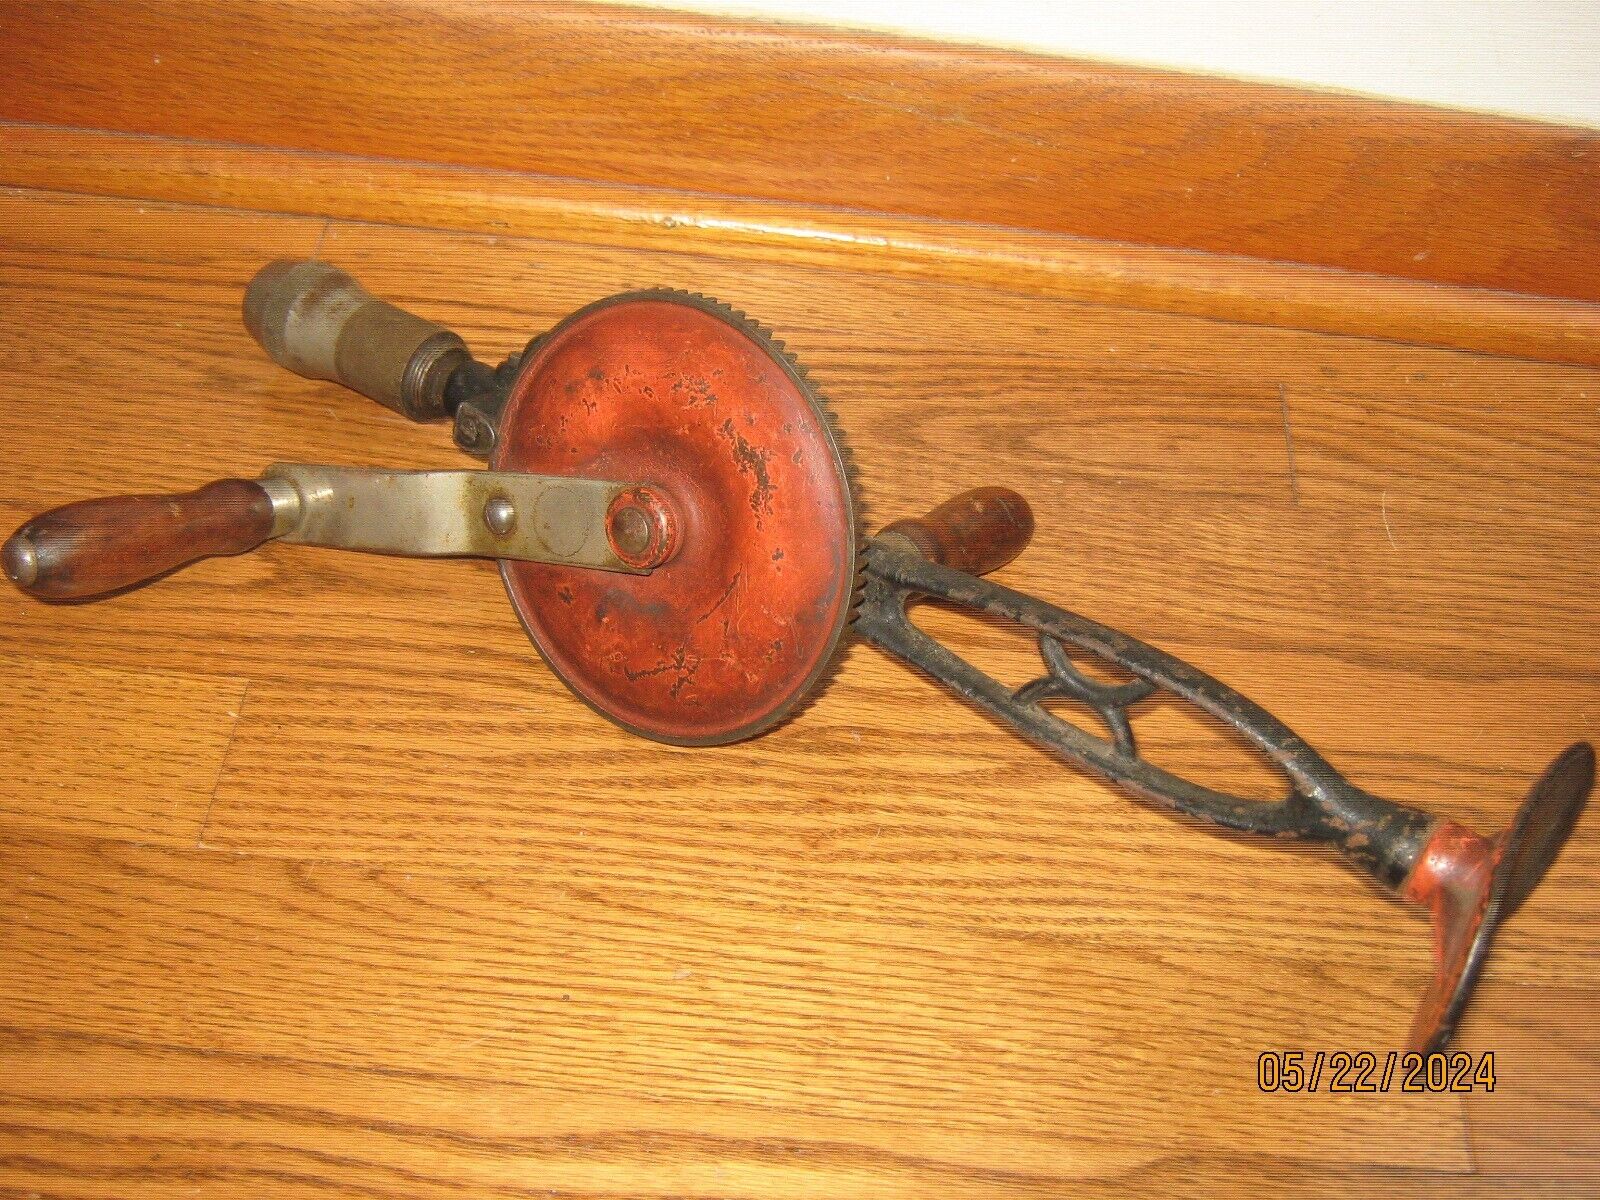 GOODELL BROTHERS COMPANY RARE BREAST DRILL PATENTED MARCH 31st 1896 TOUGH FIND